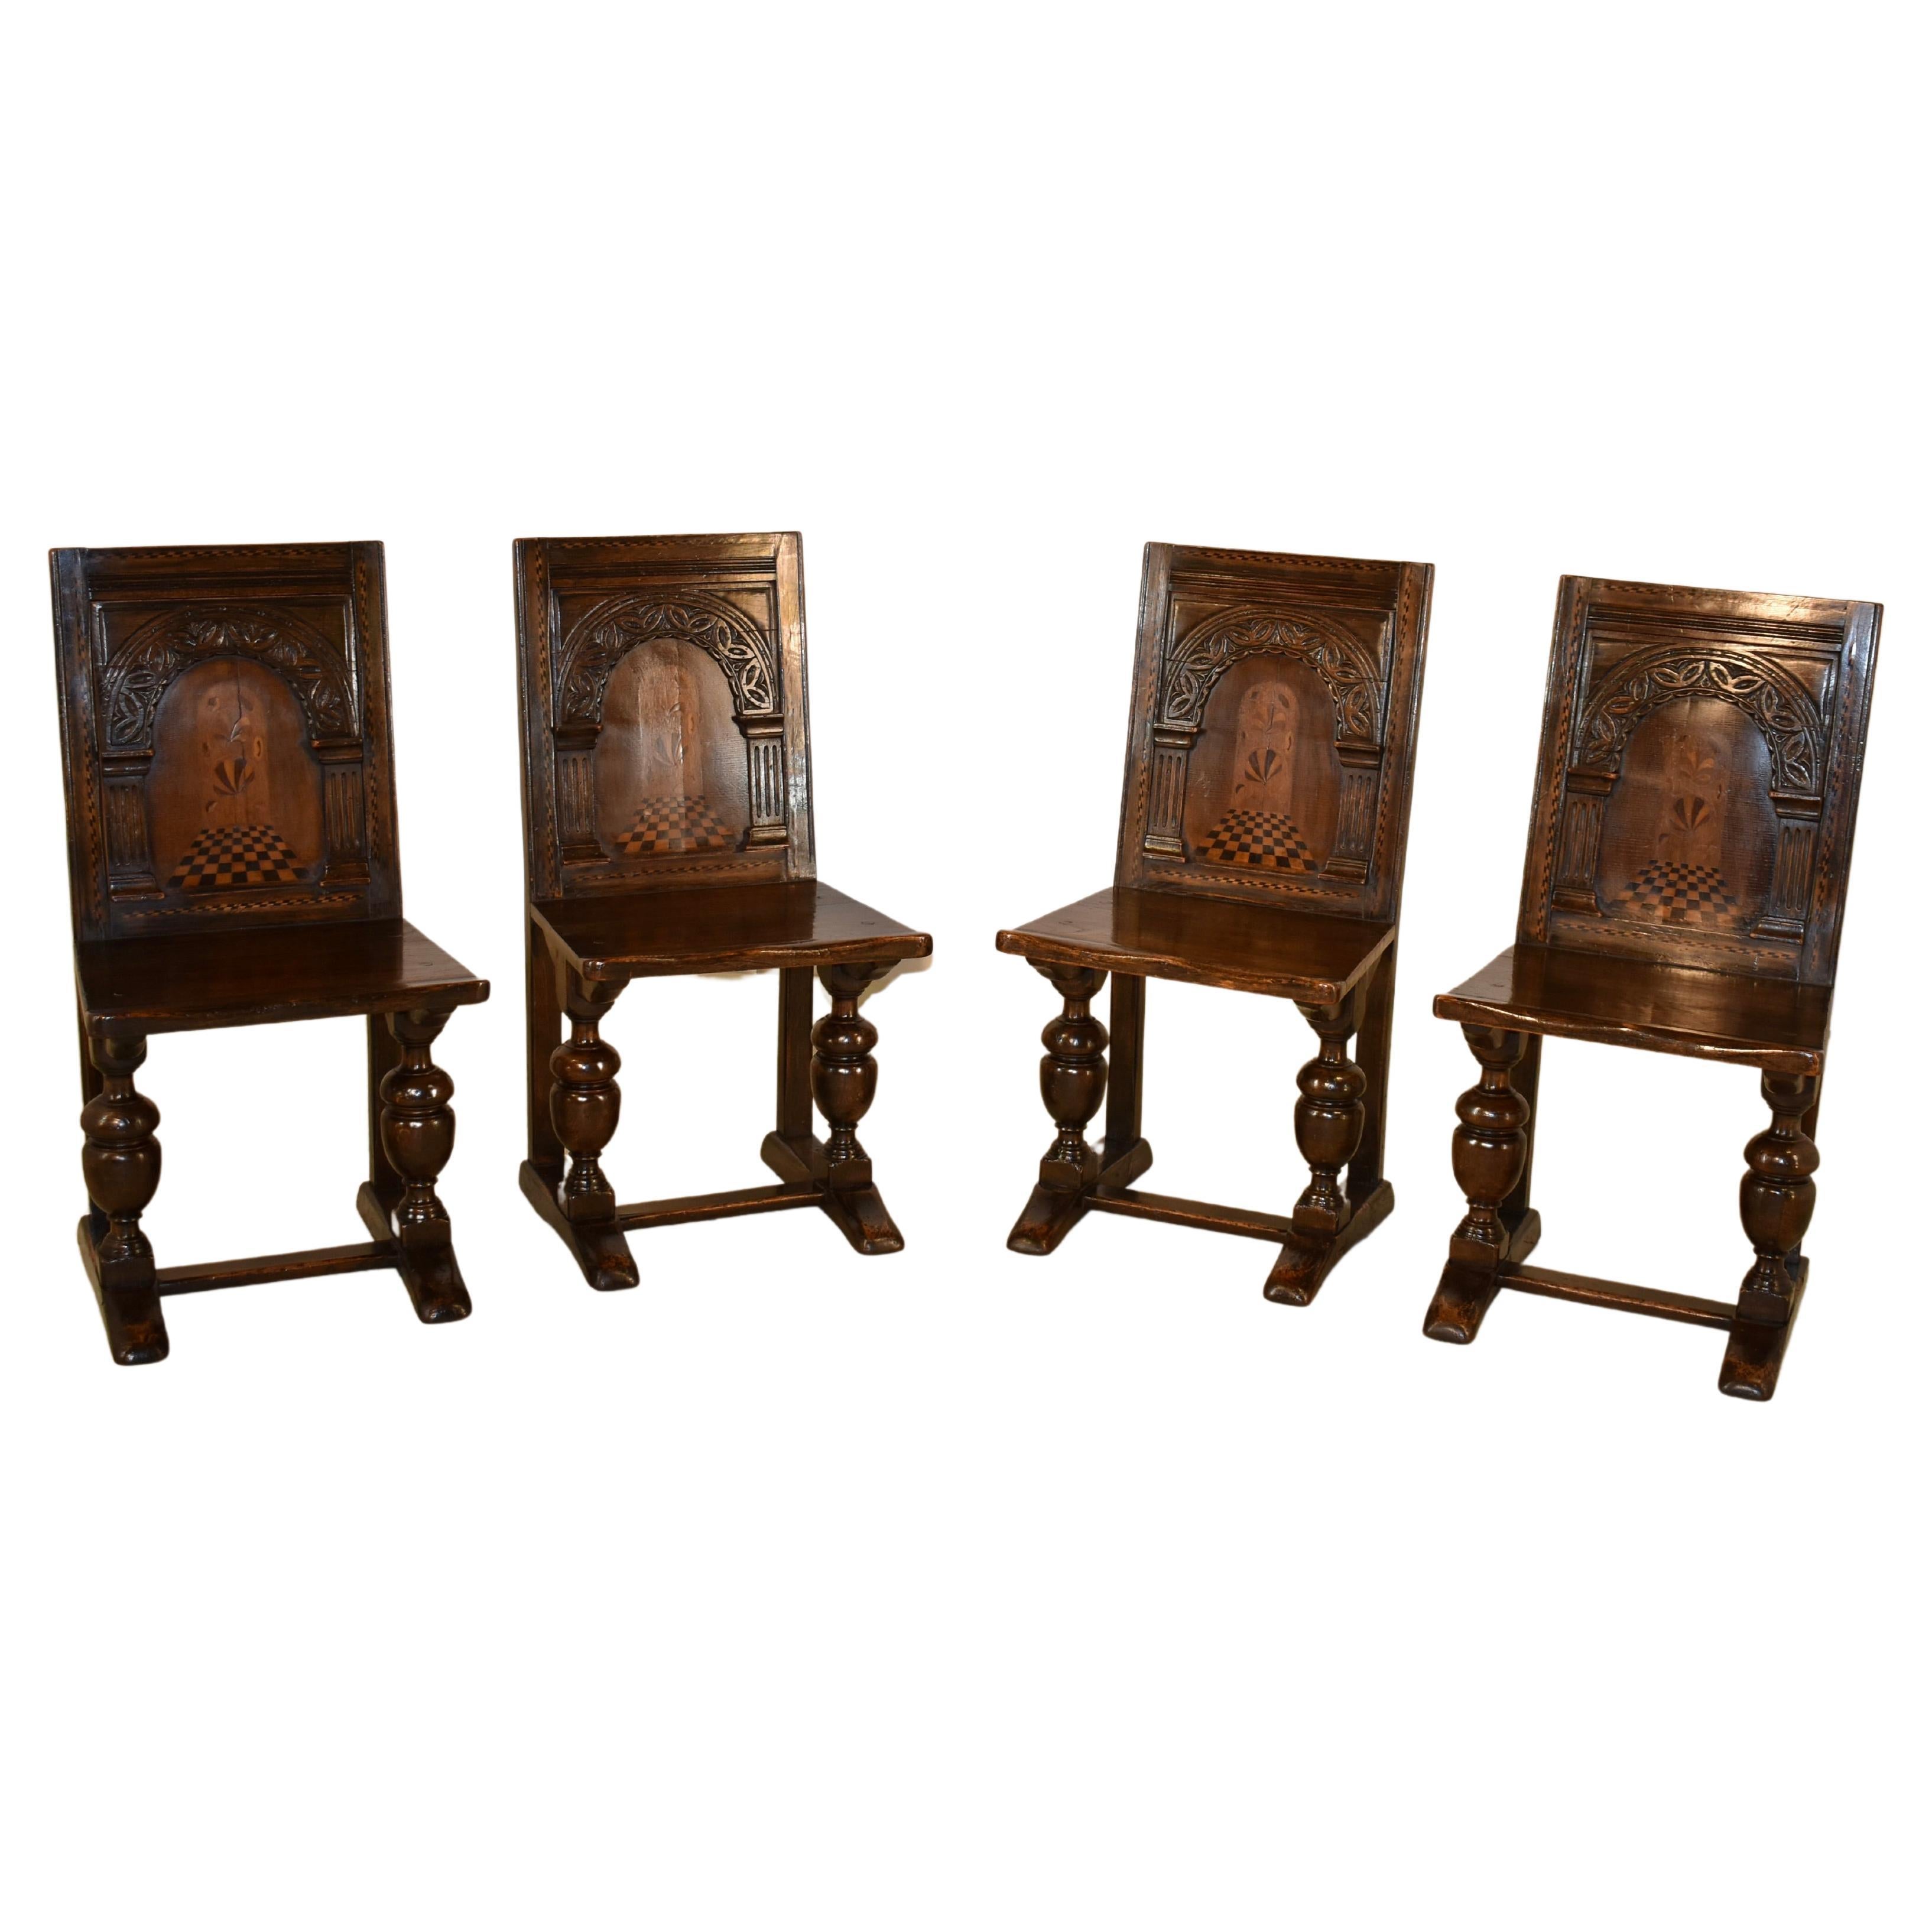 19th Century Set of 4 English Oak Parquetry Chairs